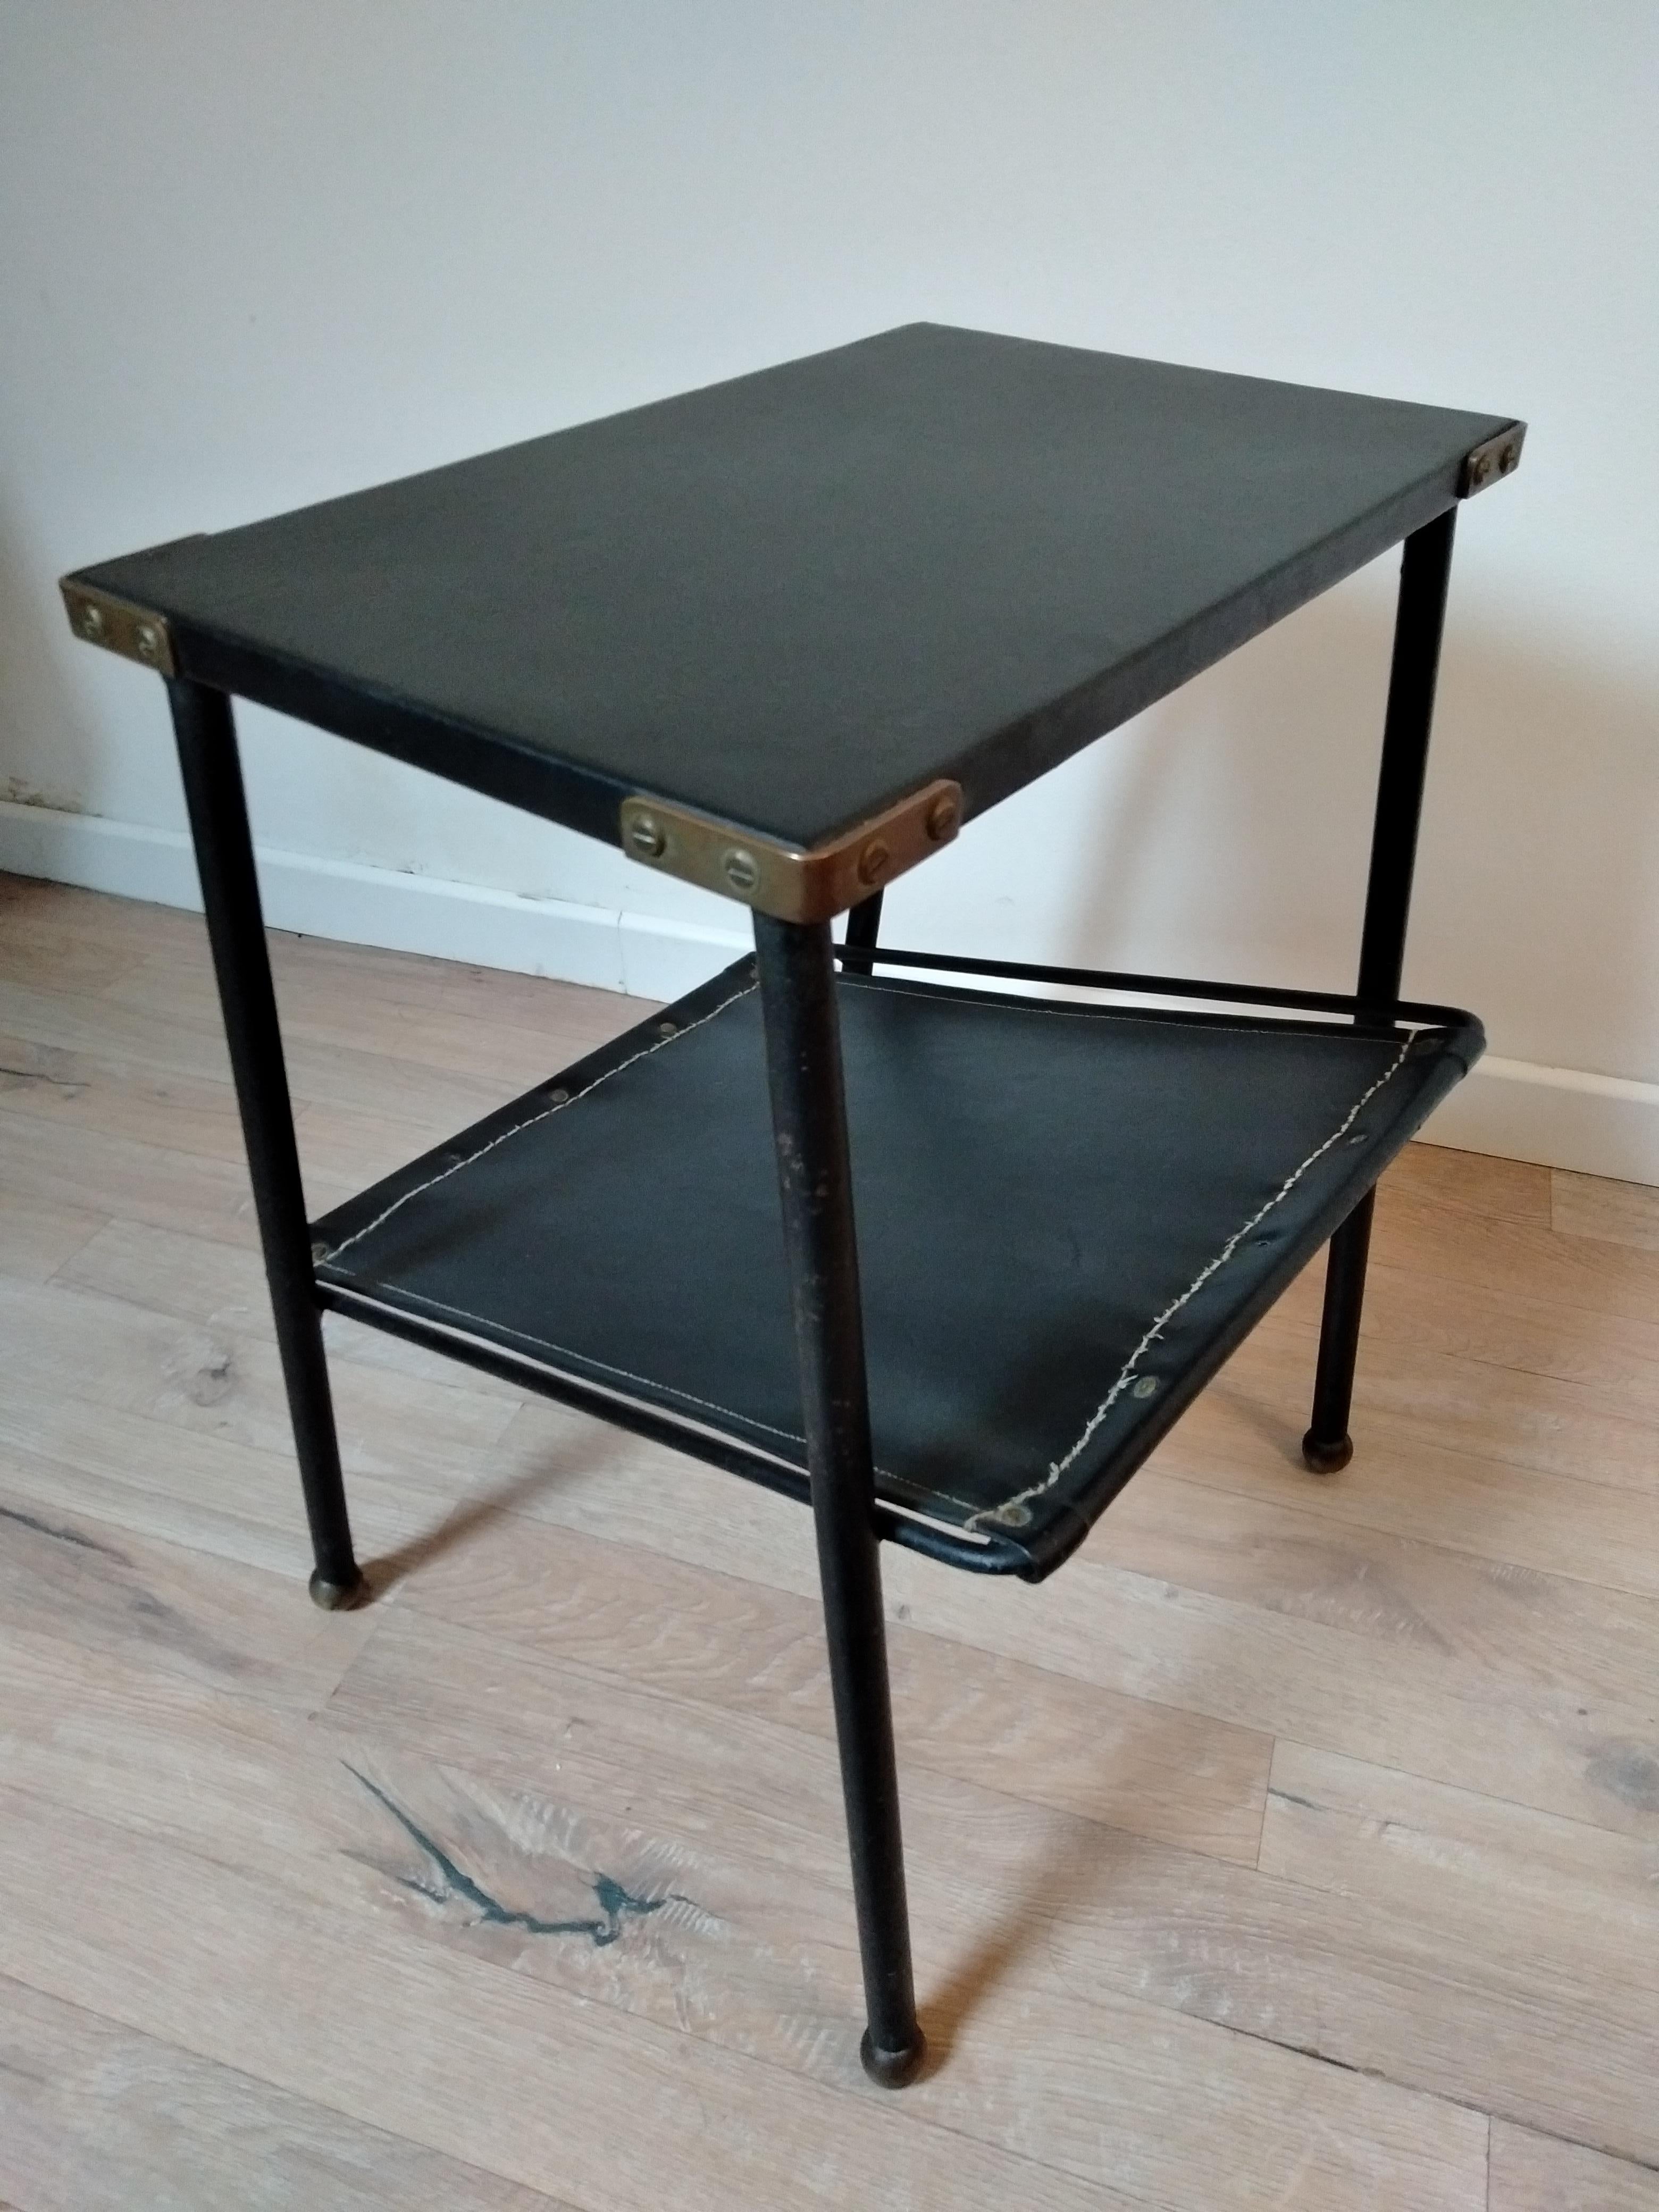 A black leather and metal side table designed by Jacques Adnet in France in 1950s. It has 2 black leather trays, the first with brass angles and the second is inclined to receive magazines. The 4 legs are metal painted black and end with golden